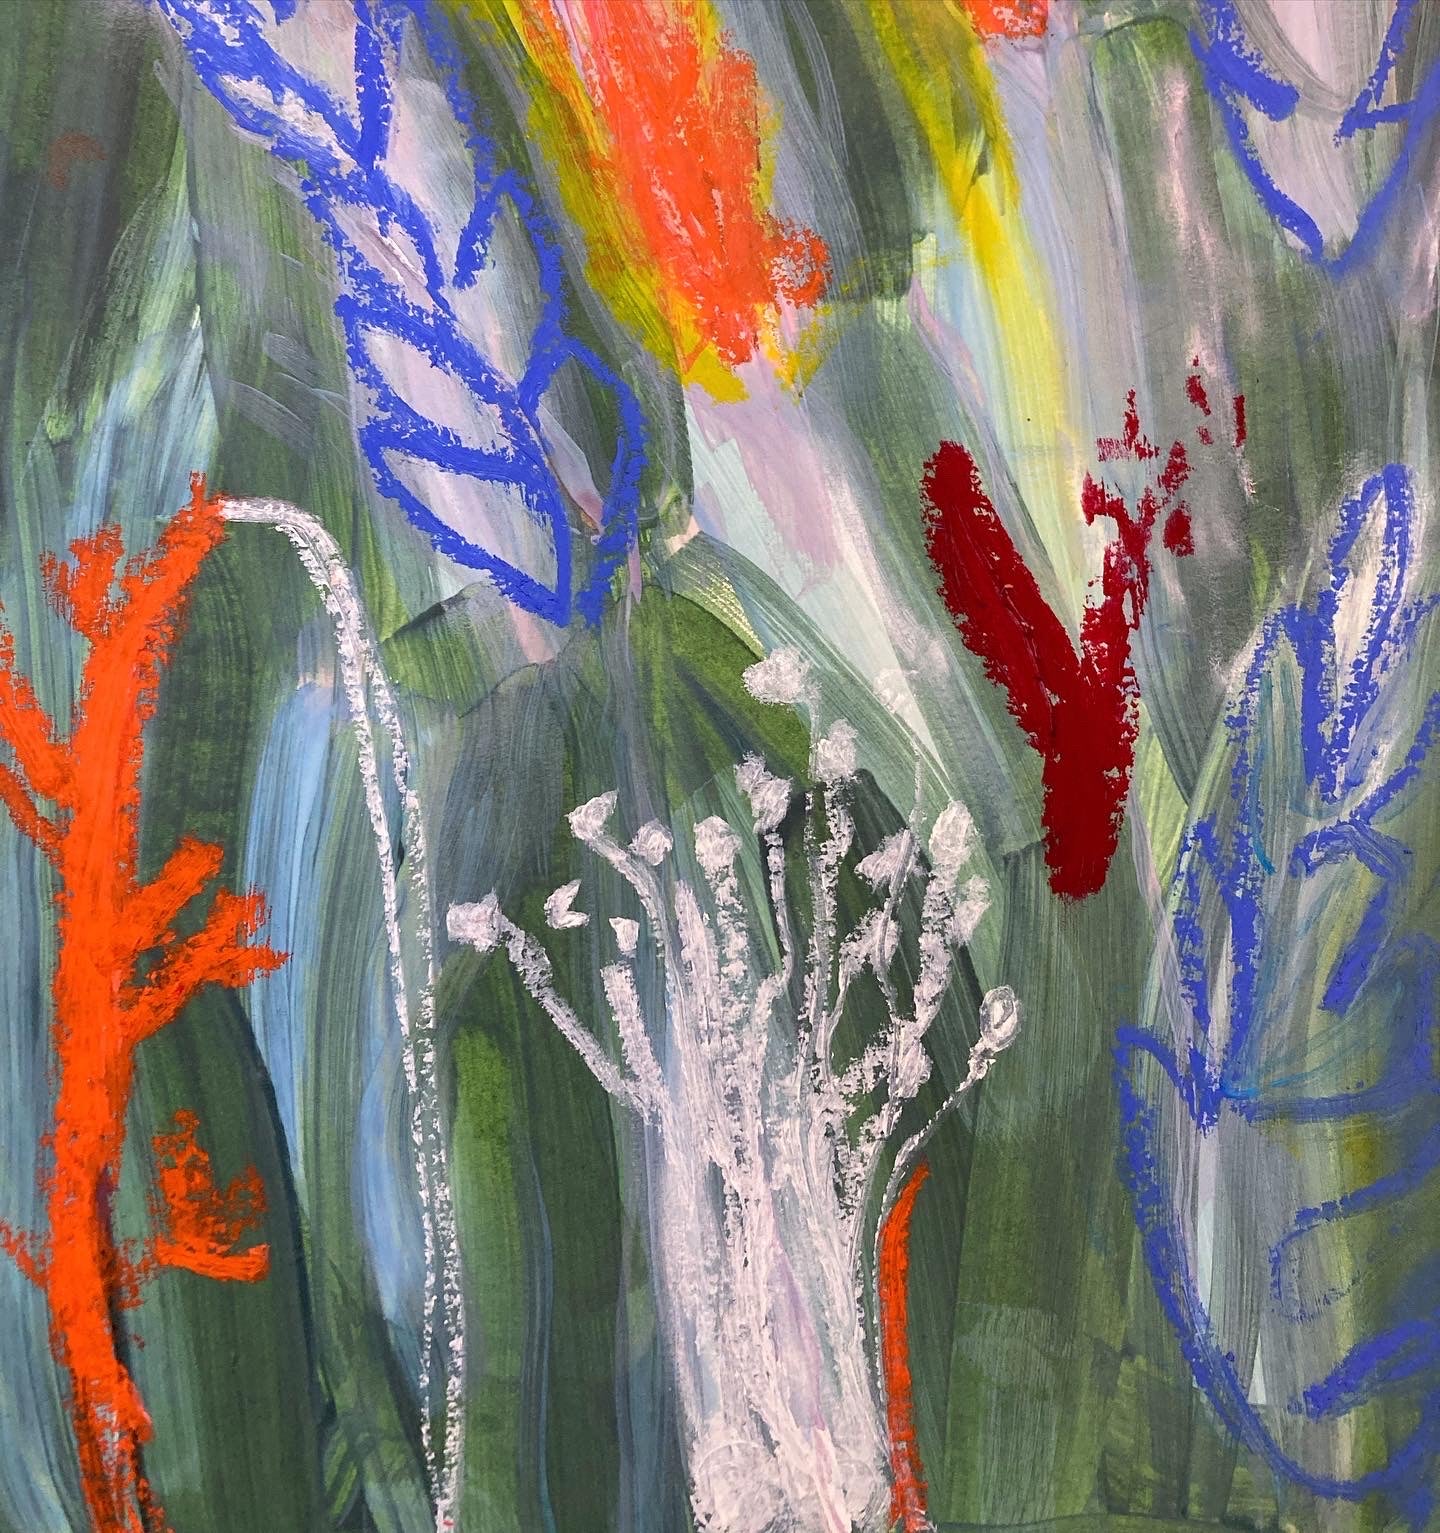 'FLEURS SAUVAGES'  - Acrylic and oil pastel on Canson paper